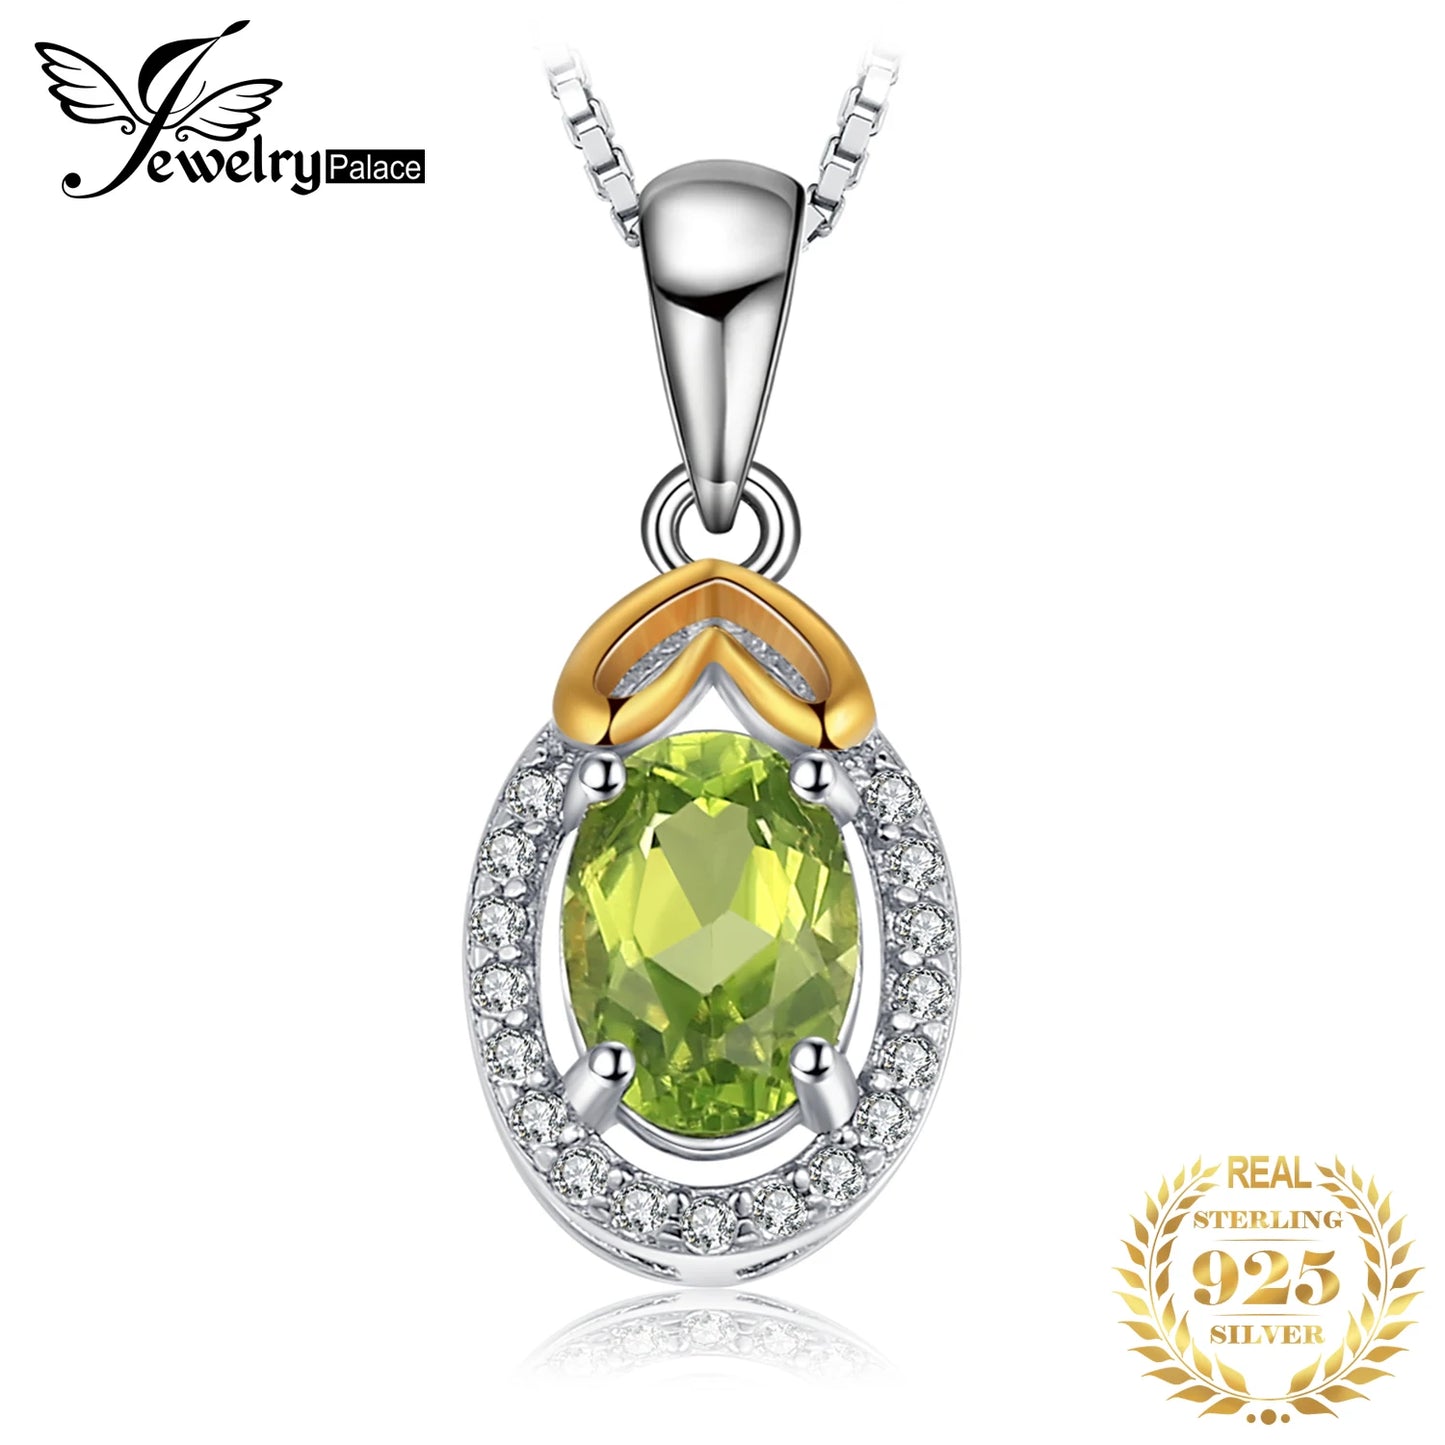 JewelryPalace Oval Cut Genuine Natural Green Peridot 925 Sterling Silver Pendant Necklace Gemstone Necklace for Women No Chain CHINA